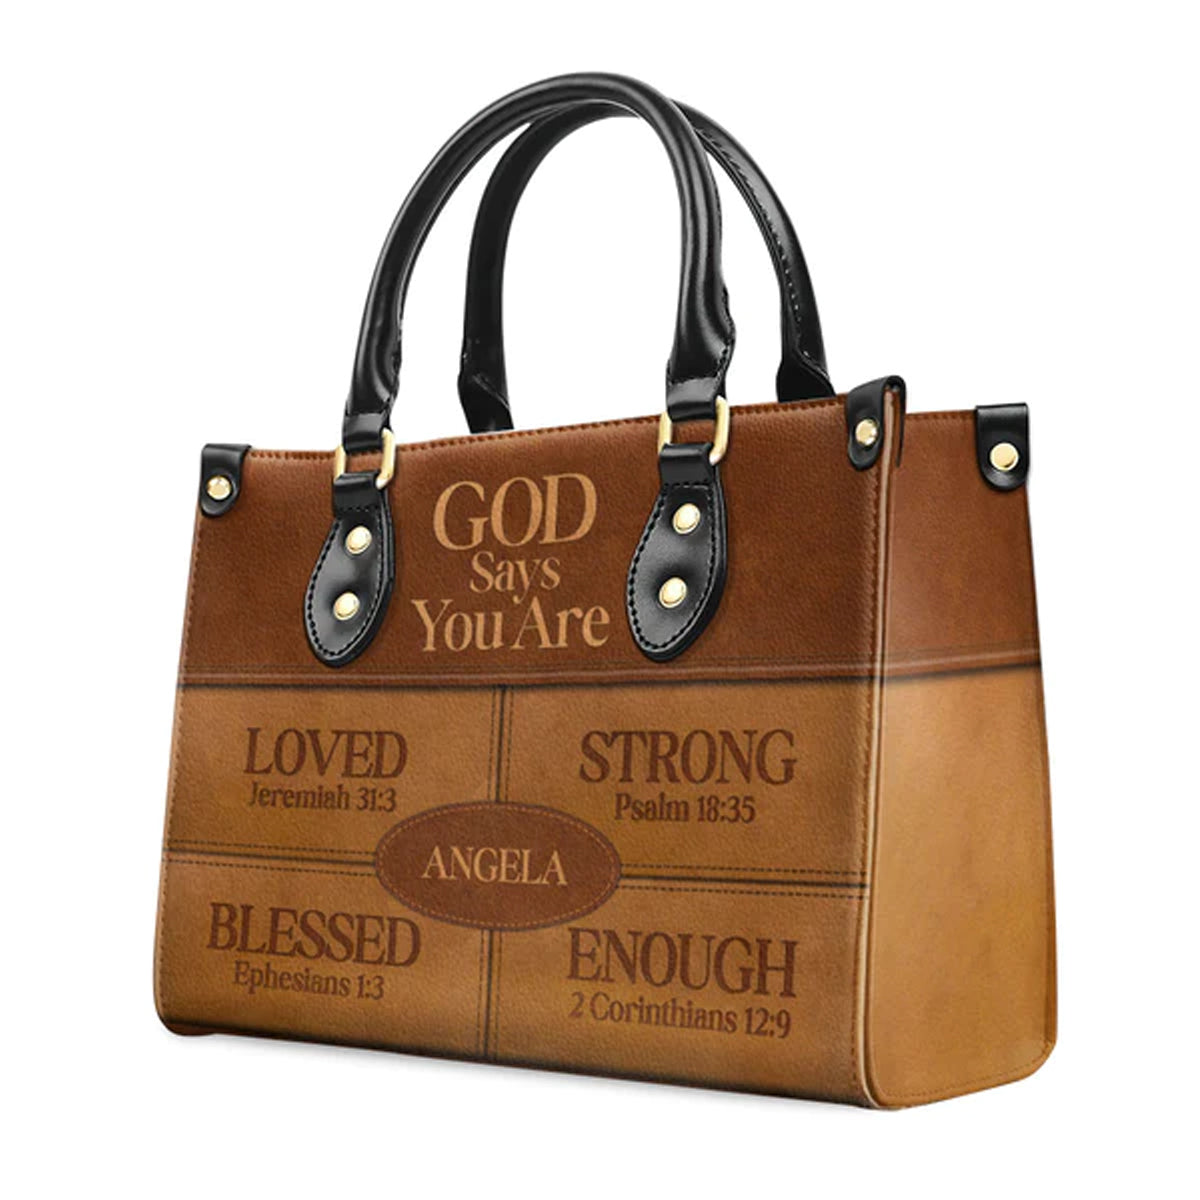 Christianartbag Handbags, God Says You Are Strong Psalm 18:35 Leather Bags, Personalized Bags, Gifts for Women, Christmas Gift, CABLTB04290723. - Christian Art Bag